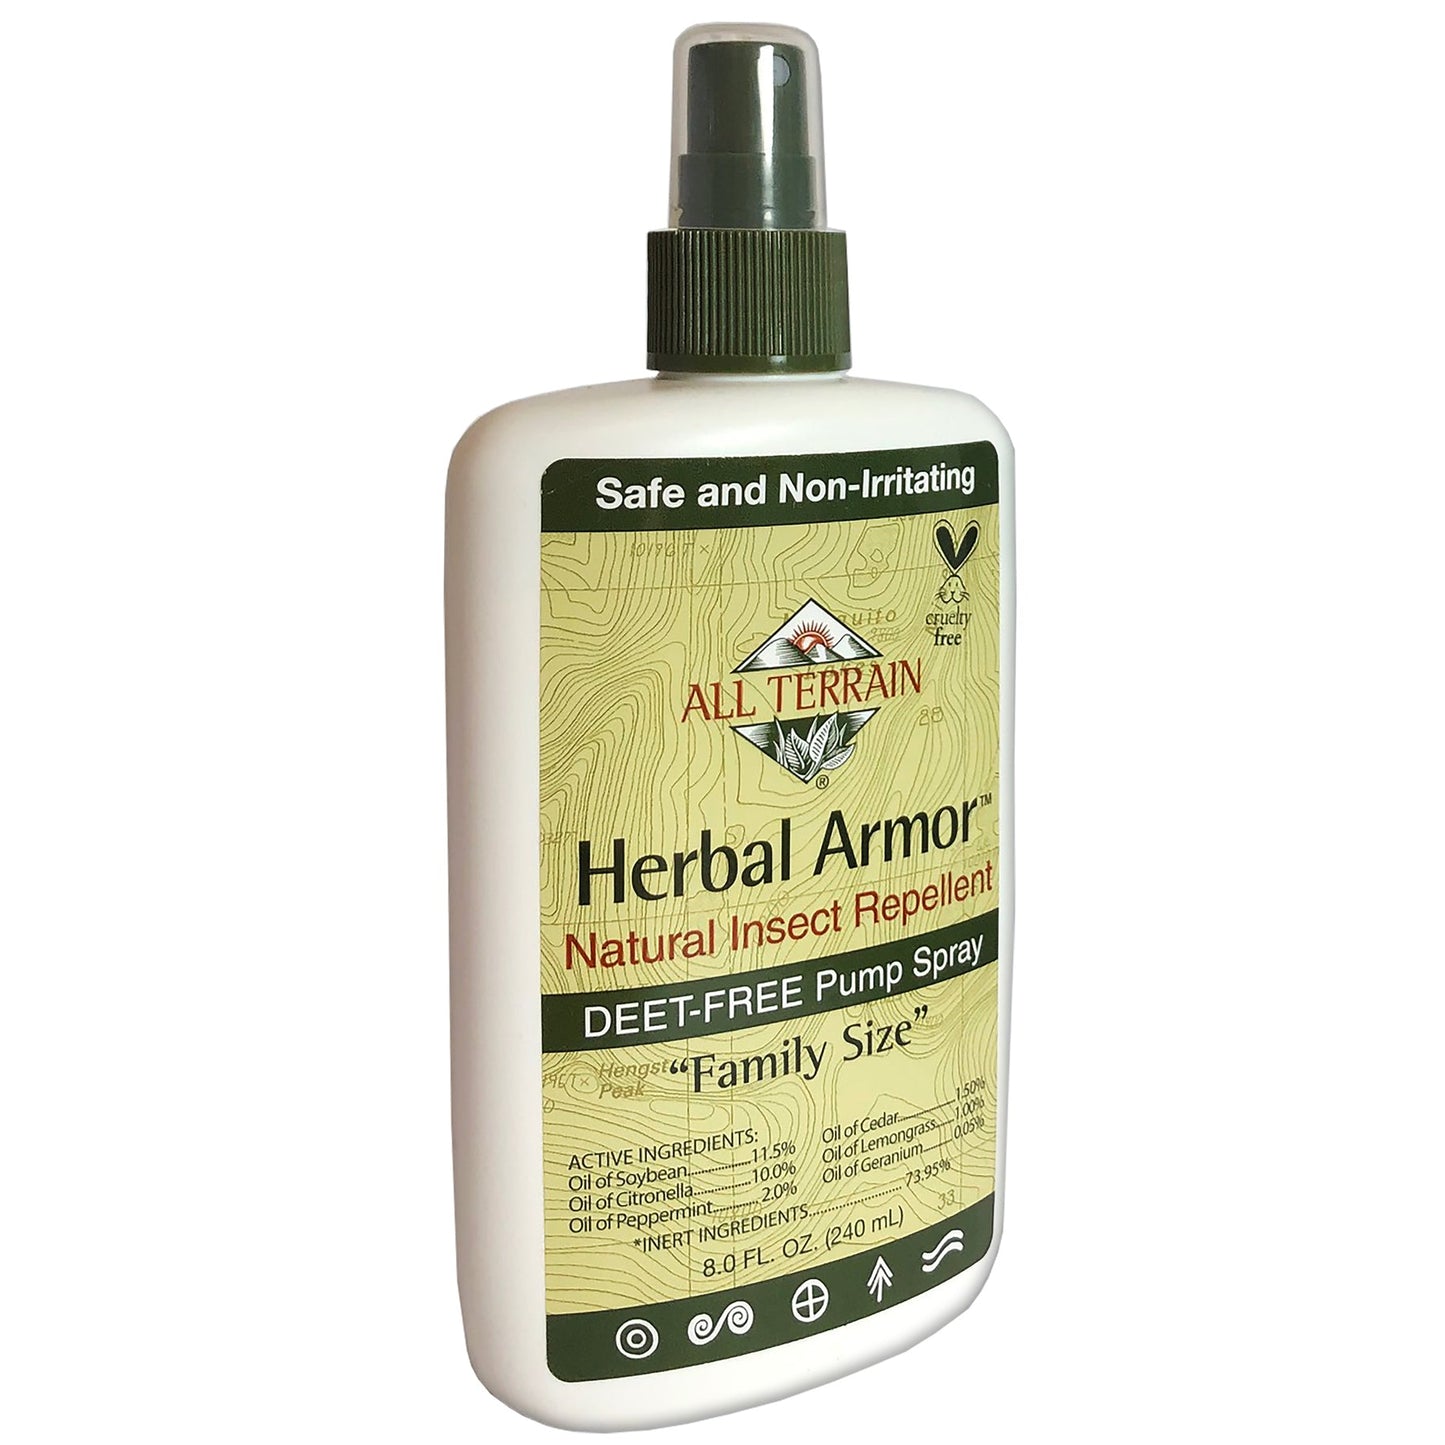 All Terrain Herbal Armor Insect Repellent 8 oz